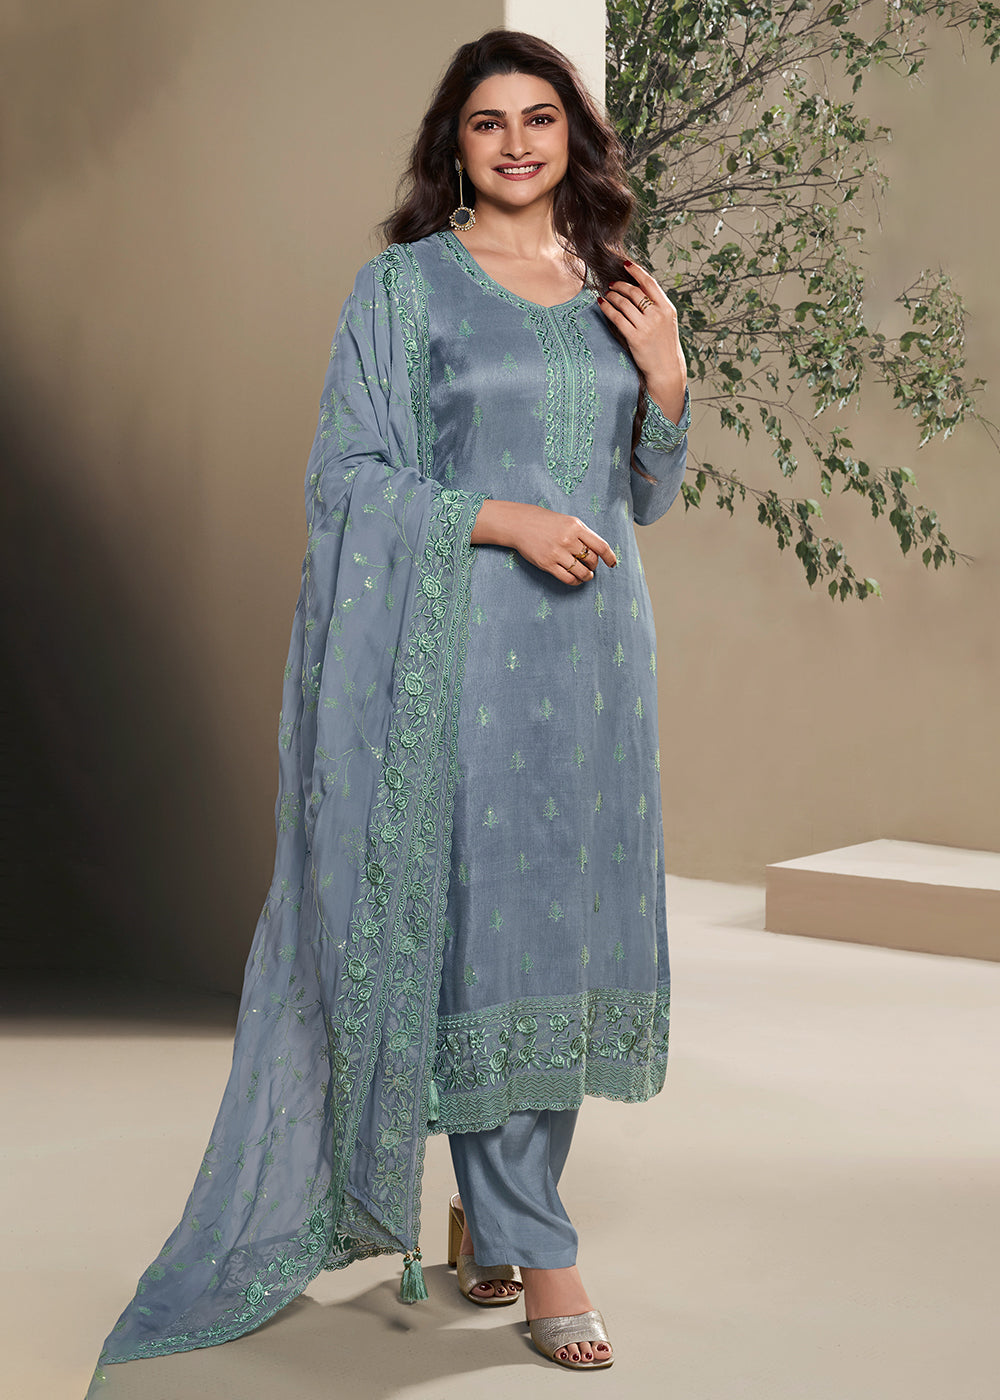 Buy Now Dola Silk Blue Thread Embroidered Wedding Salwar Suit Online in USA, UK, Canada, Germany, Australia & Worldwide at Empress Clothing.